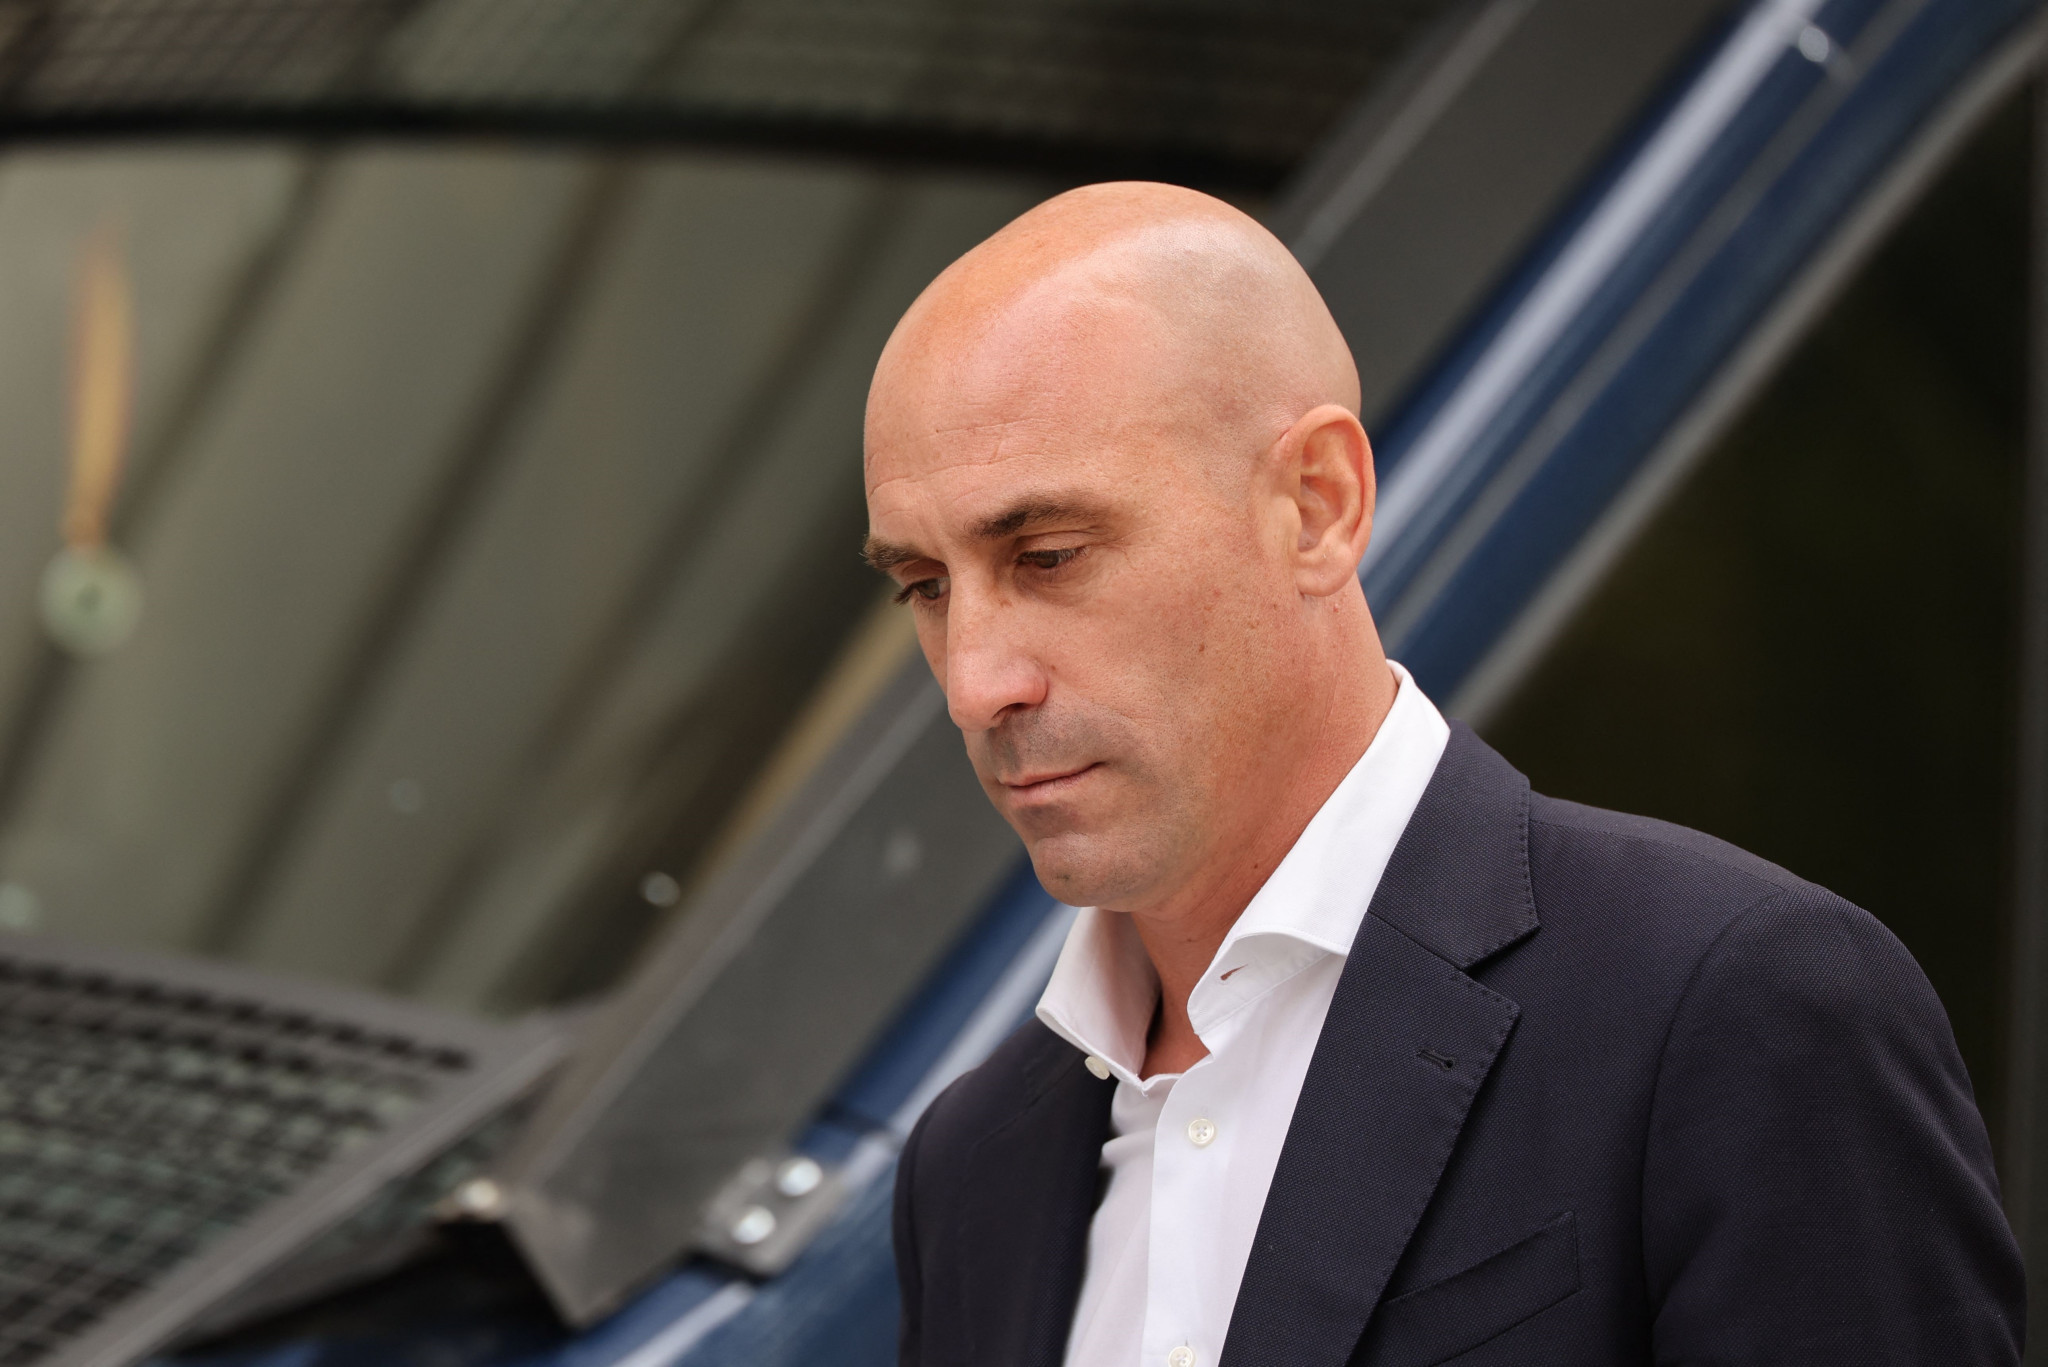 Former Royal Spanish Football Federation Luis Rubiales, facing allegations of sexual assault and coercion, has been ordered to stay away from player Jenni Hermoso ©Getty Images 